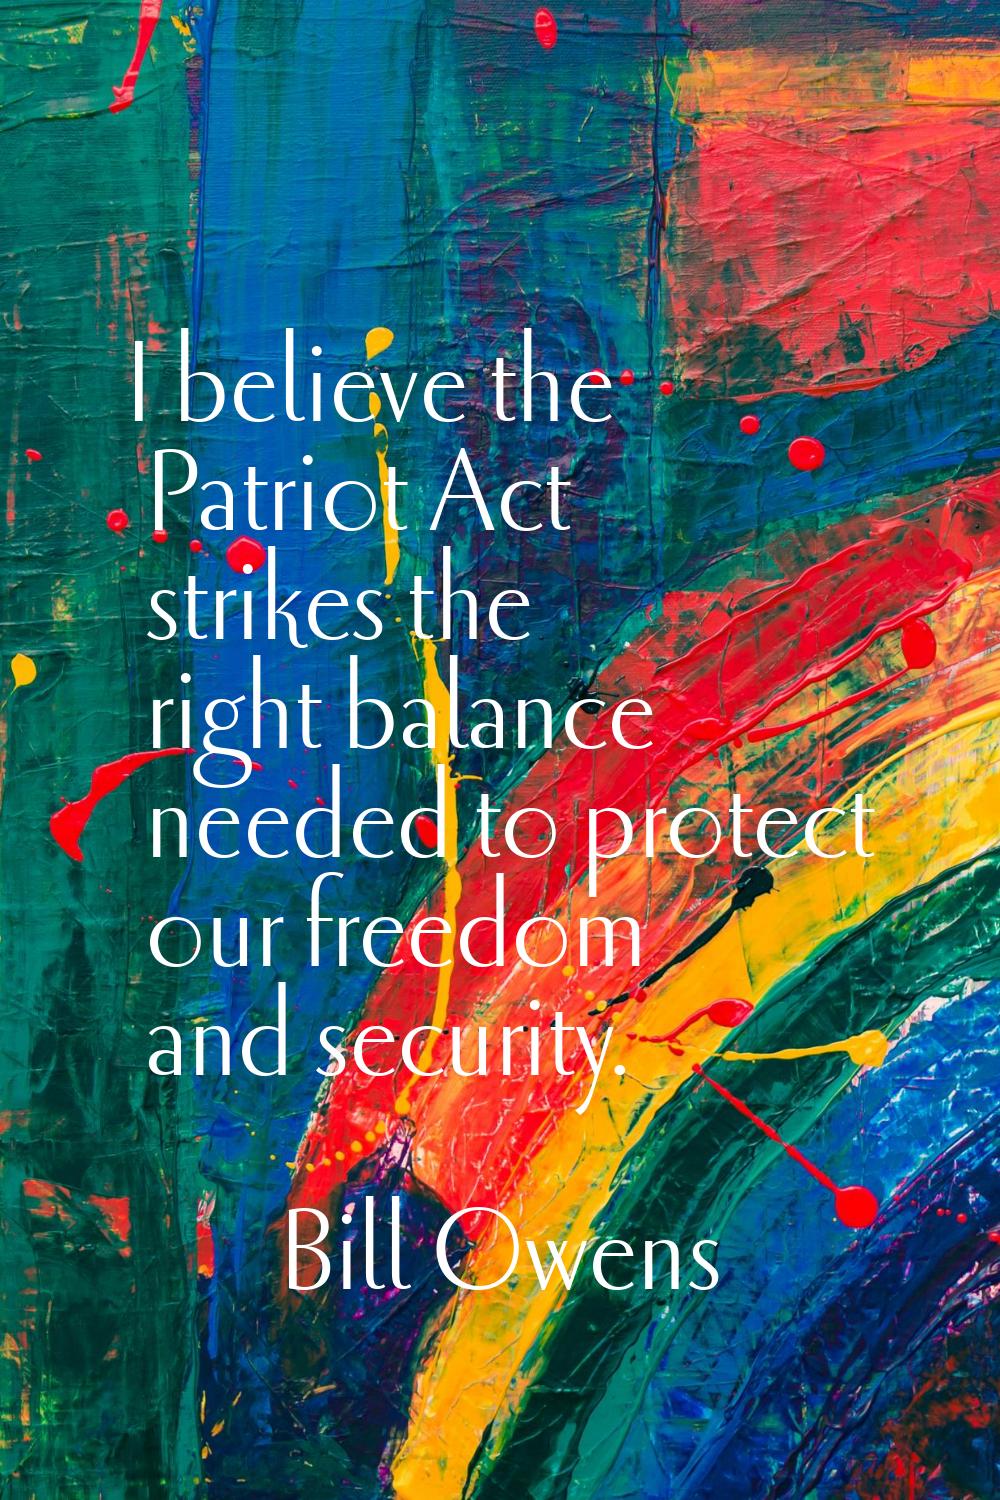 I believe the Patriot Act strikes the right balance needed to protect our freedom and security.